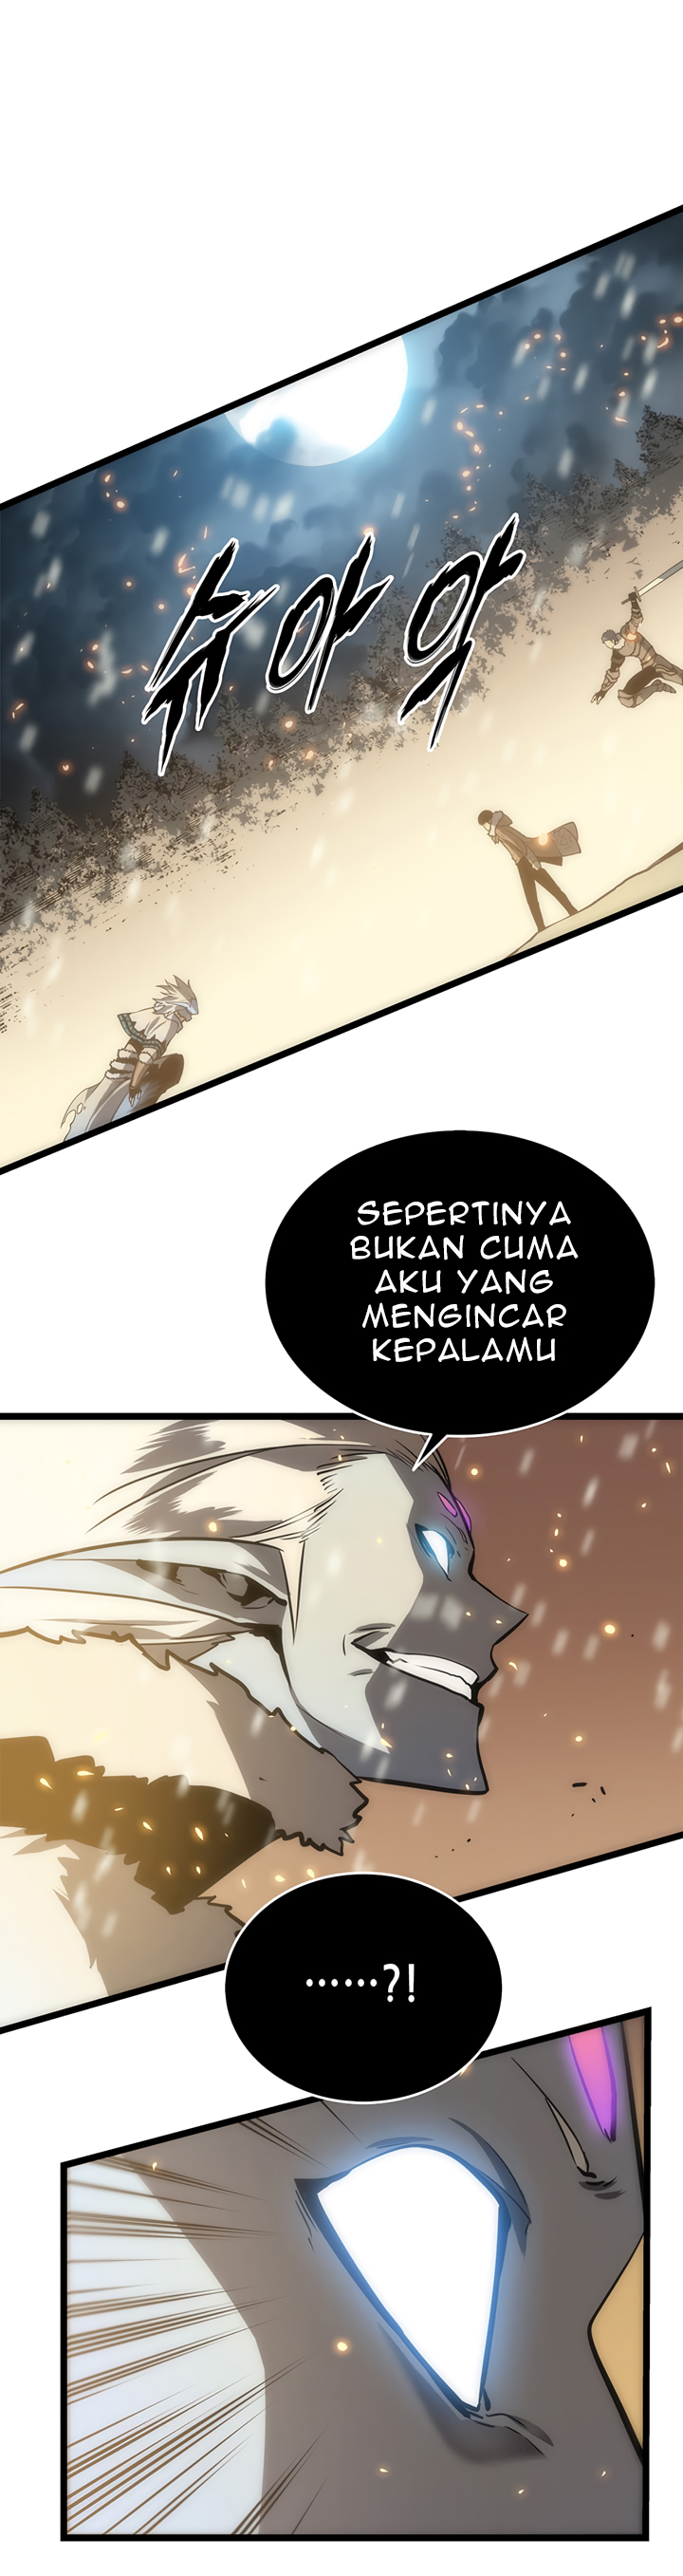 Solo Leveling Chapter 53